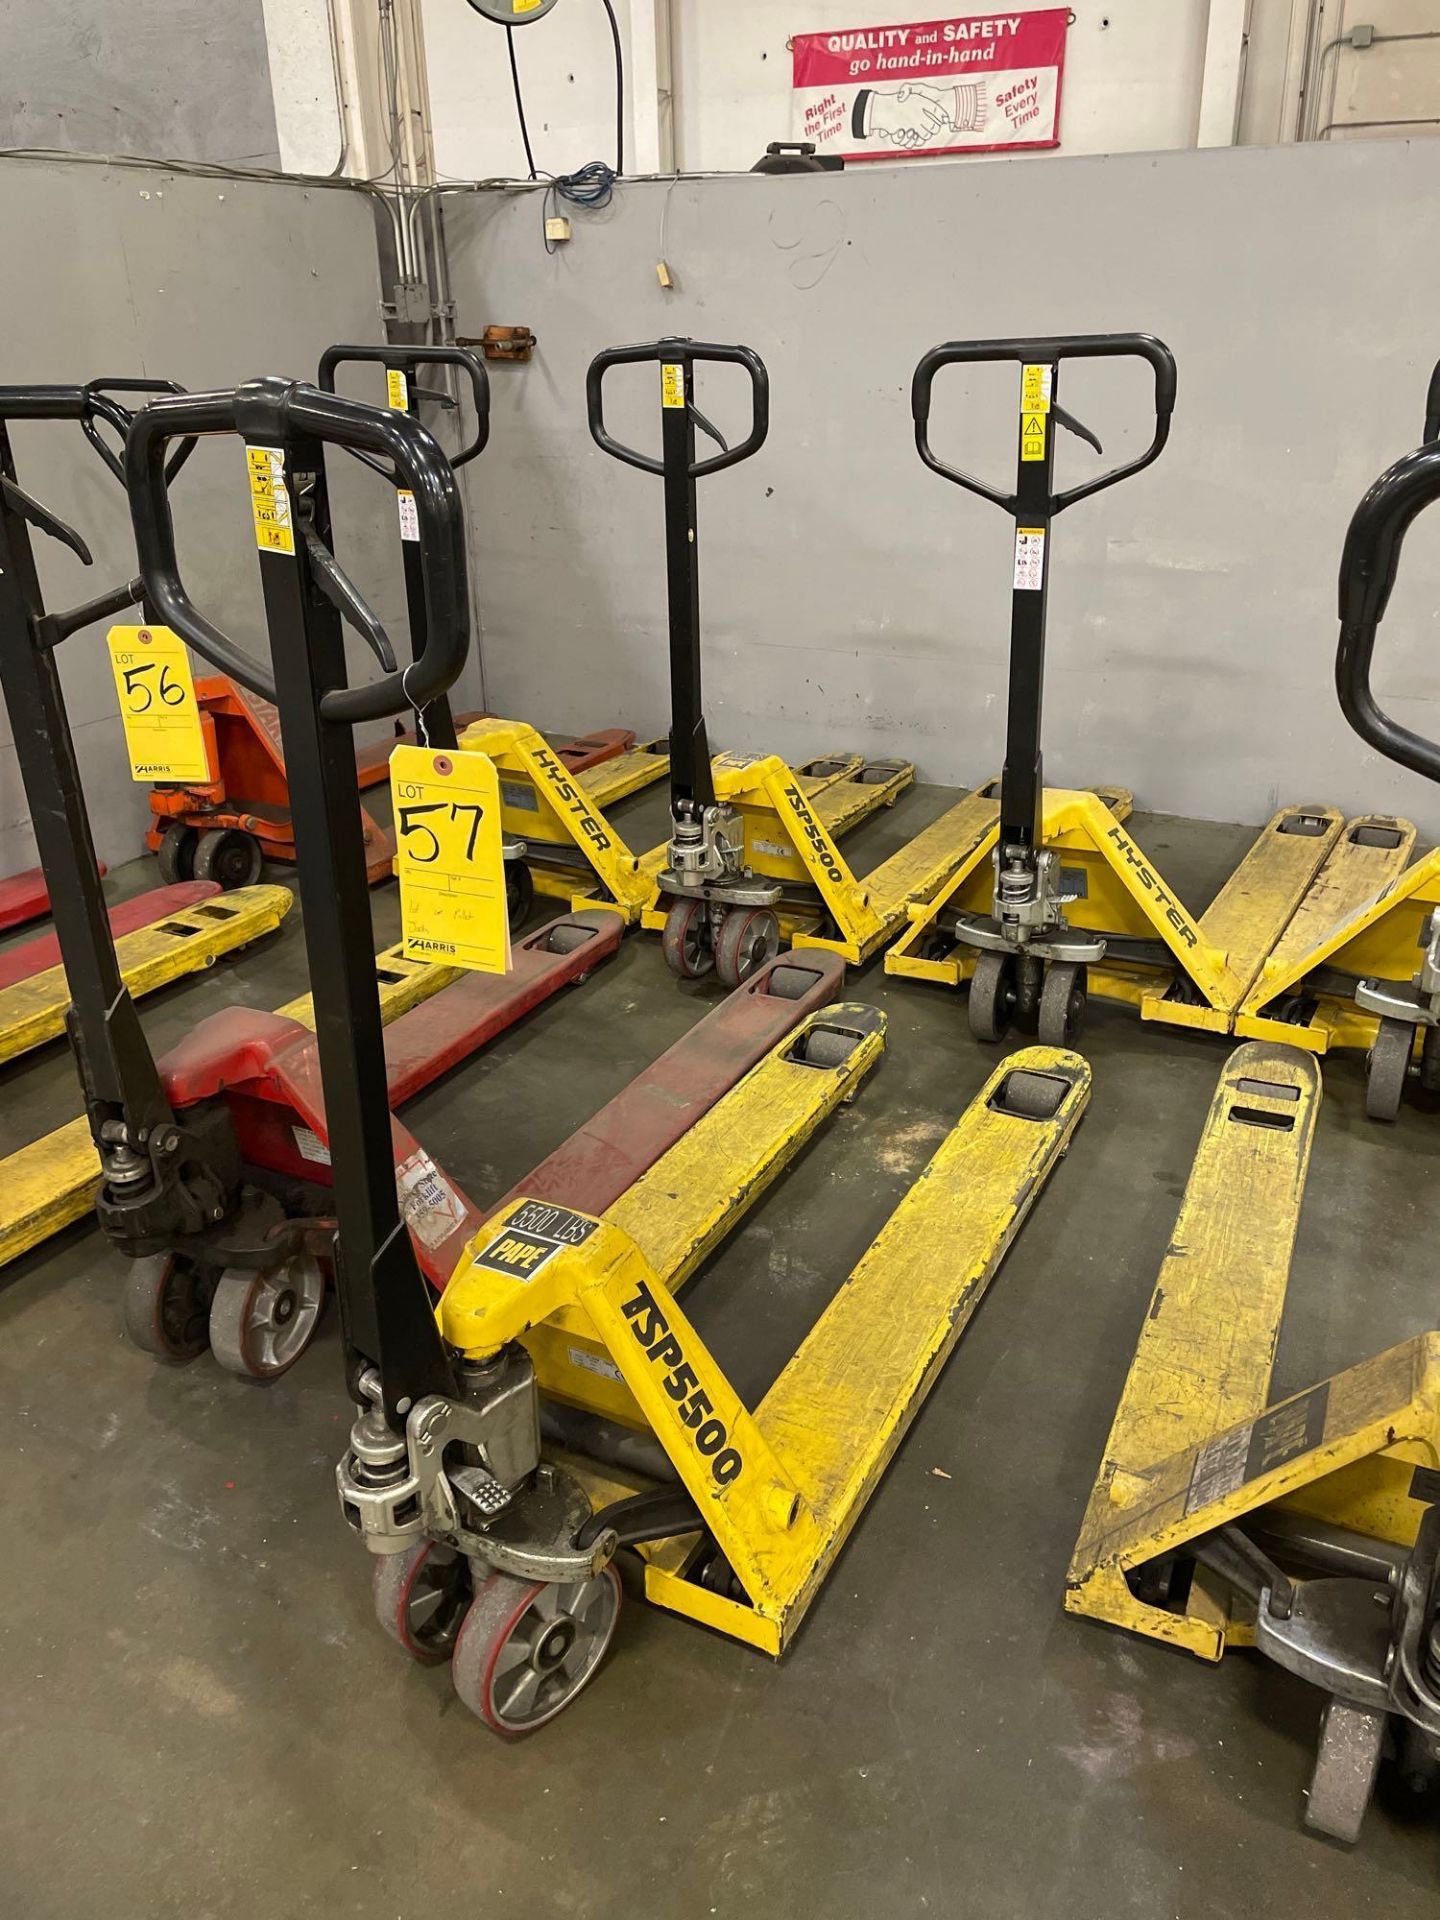 Lot of 2 Pallet Jacks: (1) Pape, max. 5,500 lbs., (1) Hyster, max. 5,500 lbs.